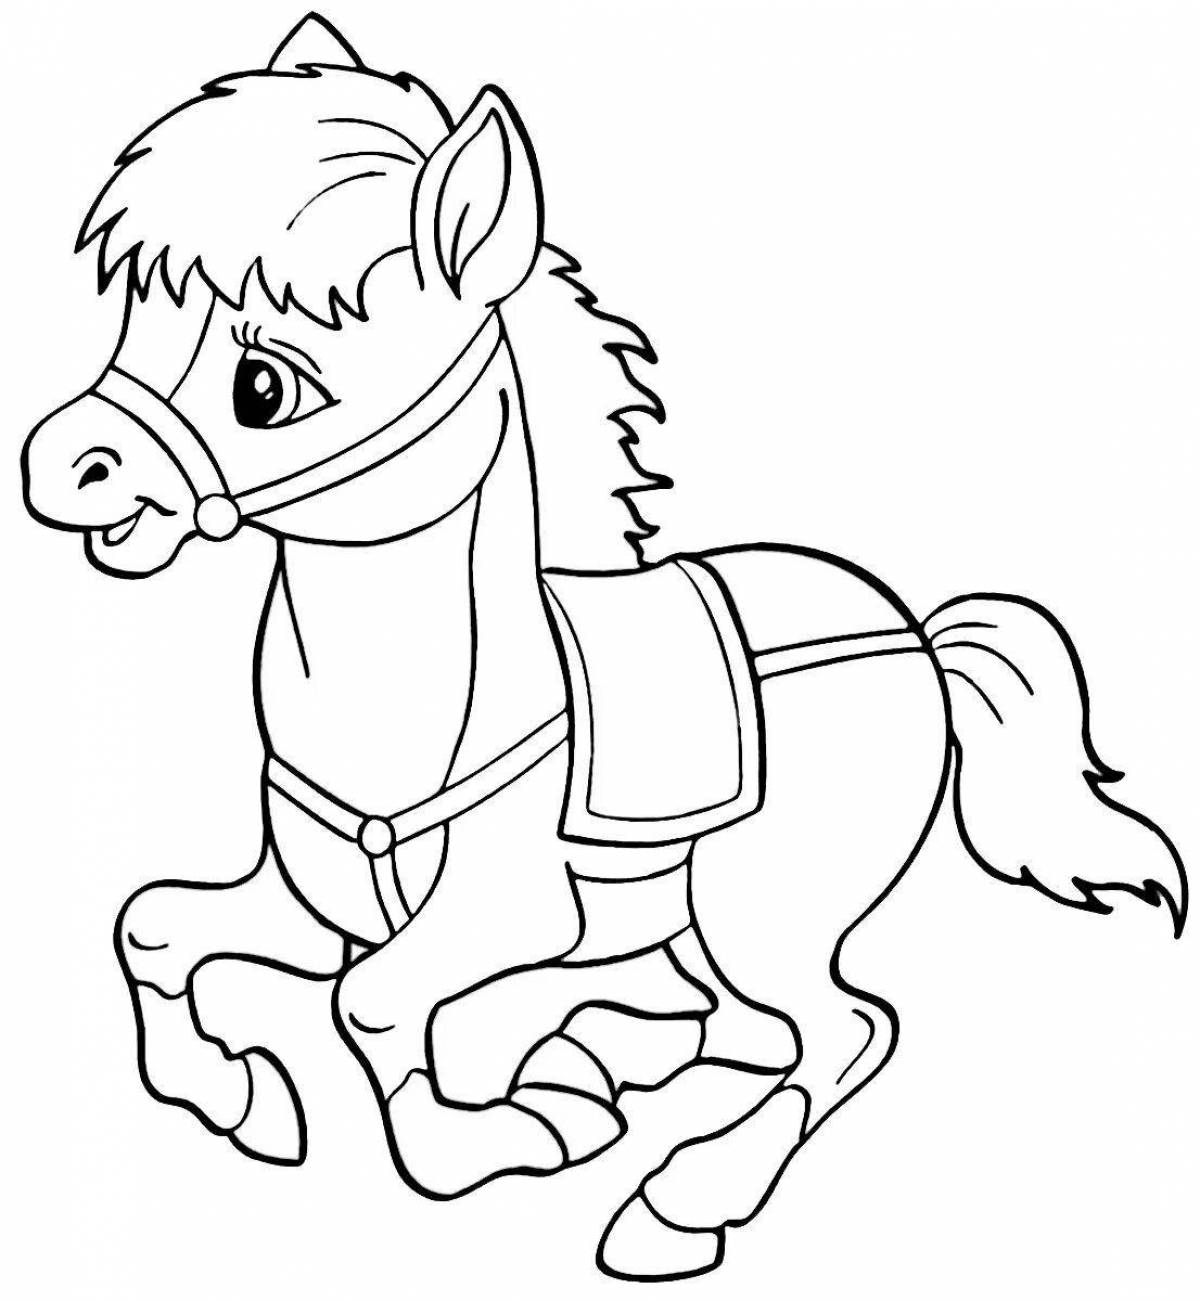 Funny horse coloring book for children 2-3 years old